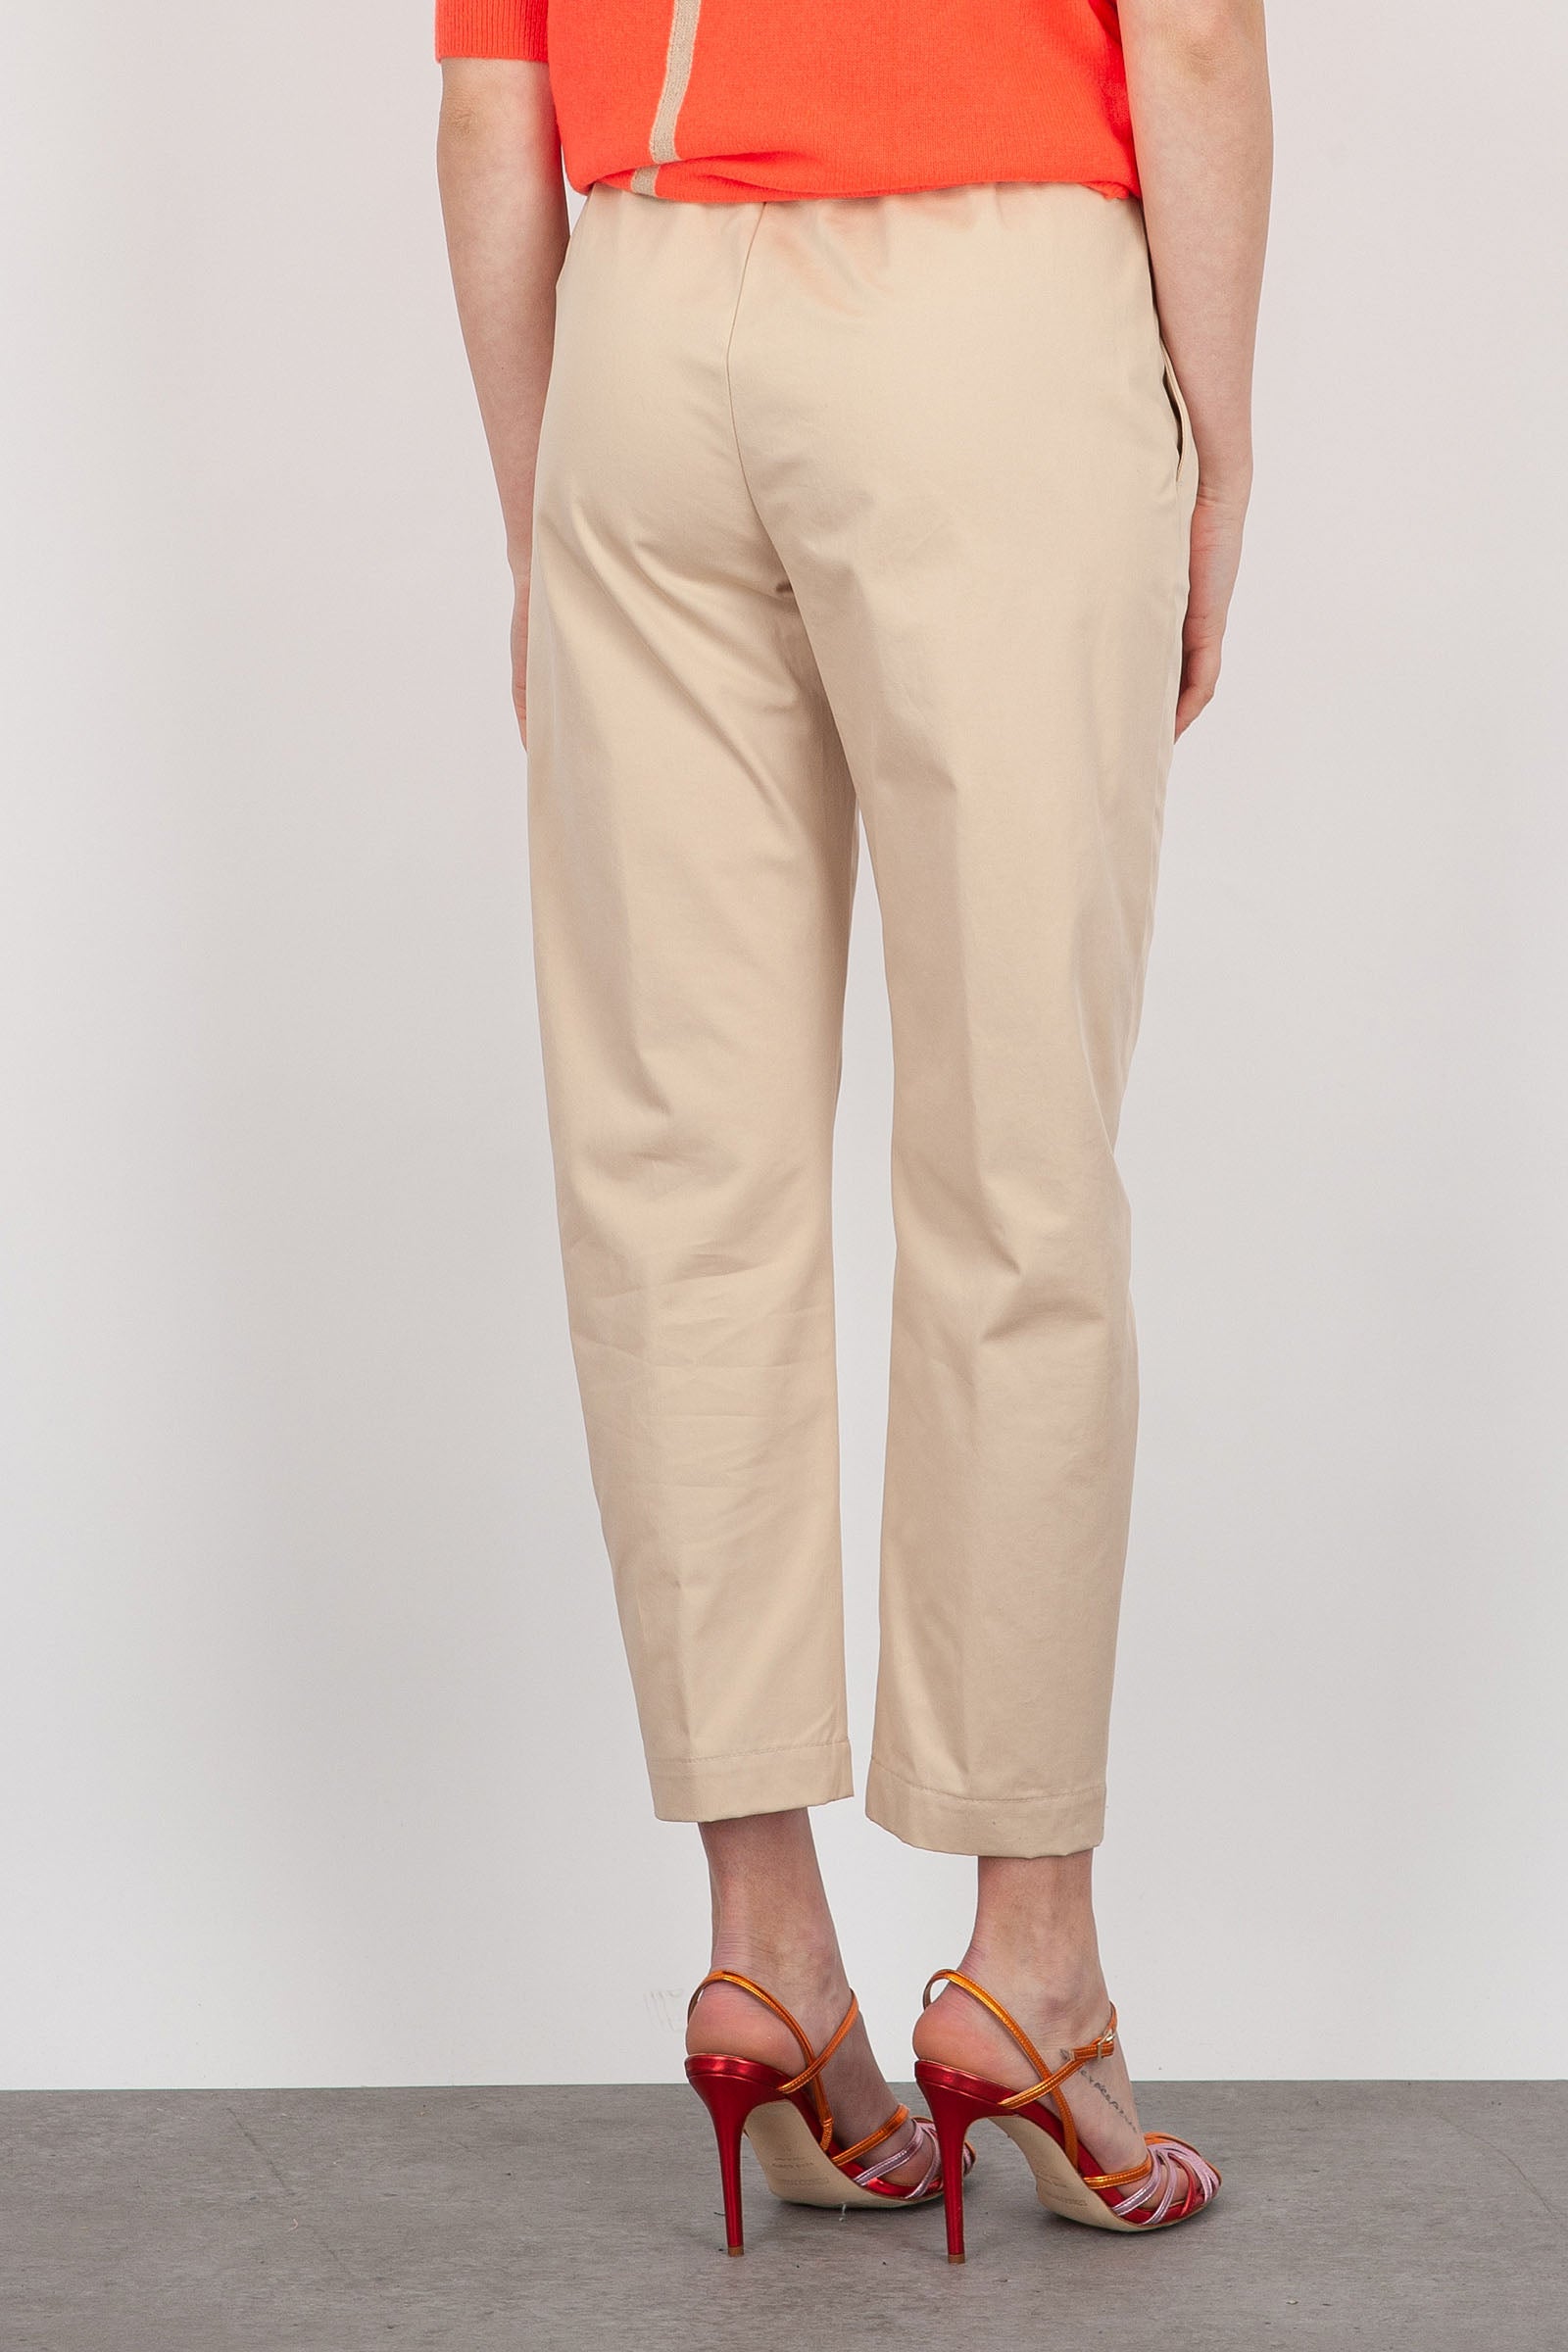 Semicouture Buddy Trousers Camel Cotton - 4